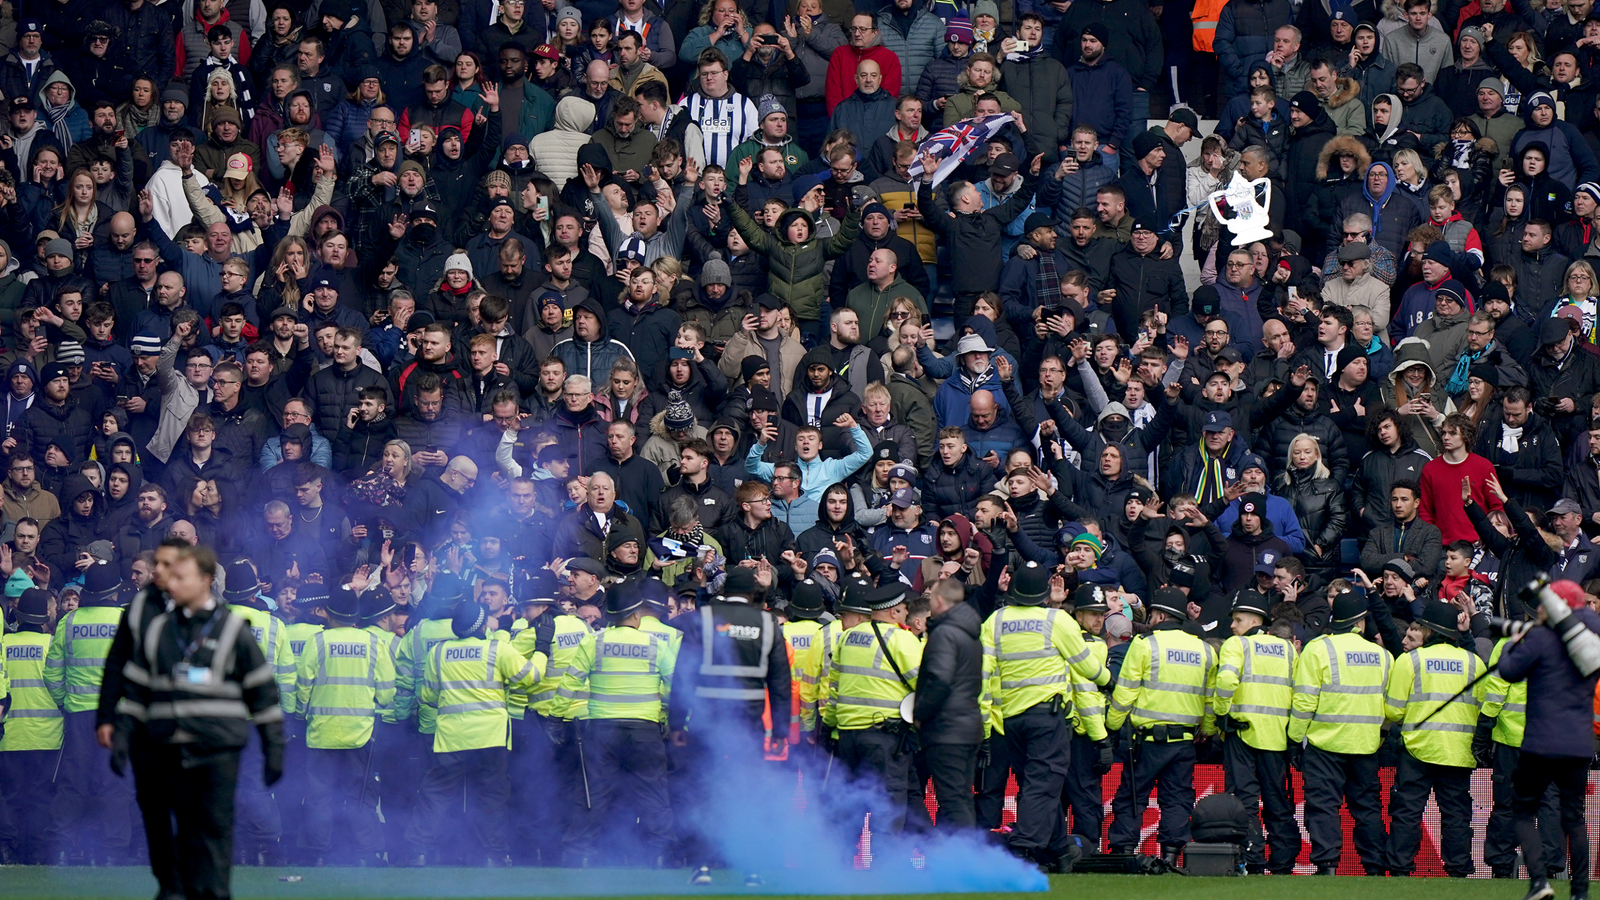 West Brom v Wolves: Officers injured and arrests made after 'completely unacceptable' violence at FA Cup tie